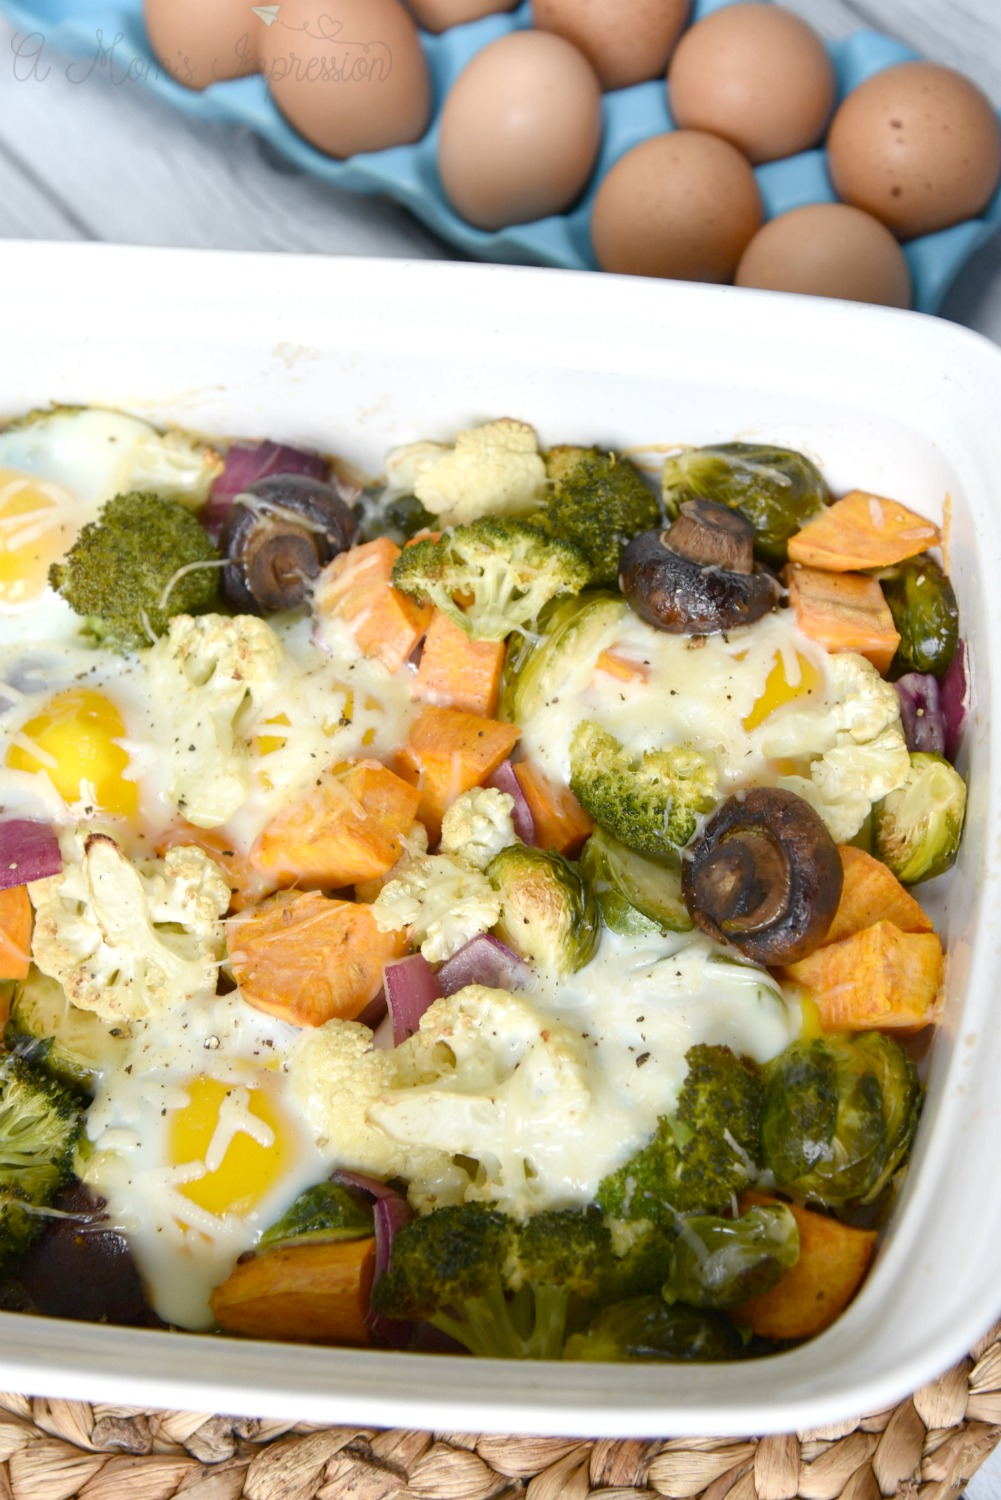 Oven Baked Eggs With Roasted Vegetables - A Mom's Impression